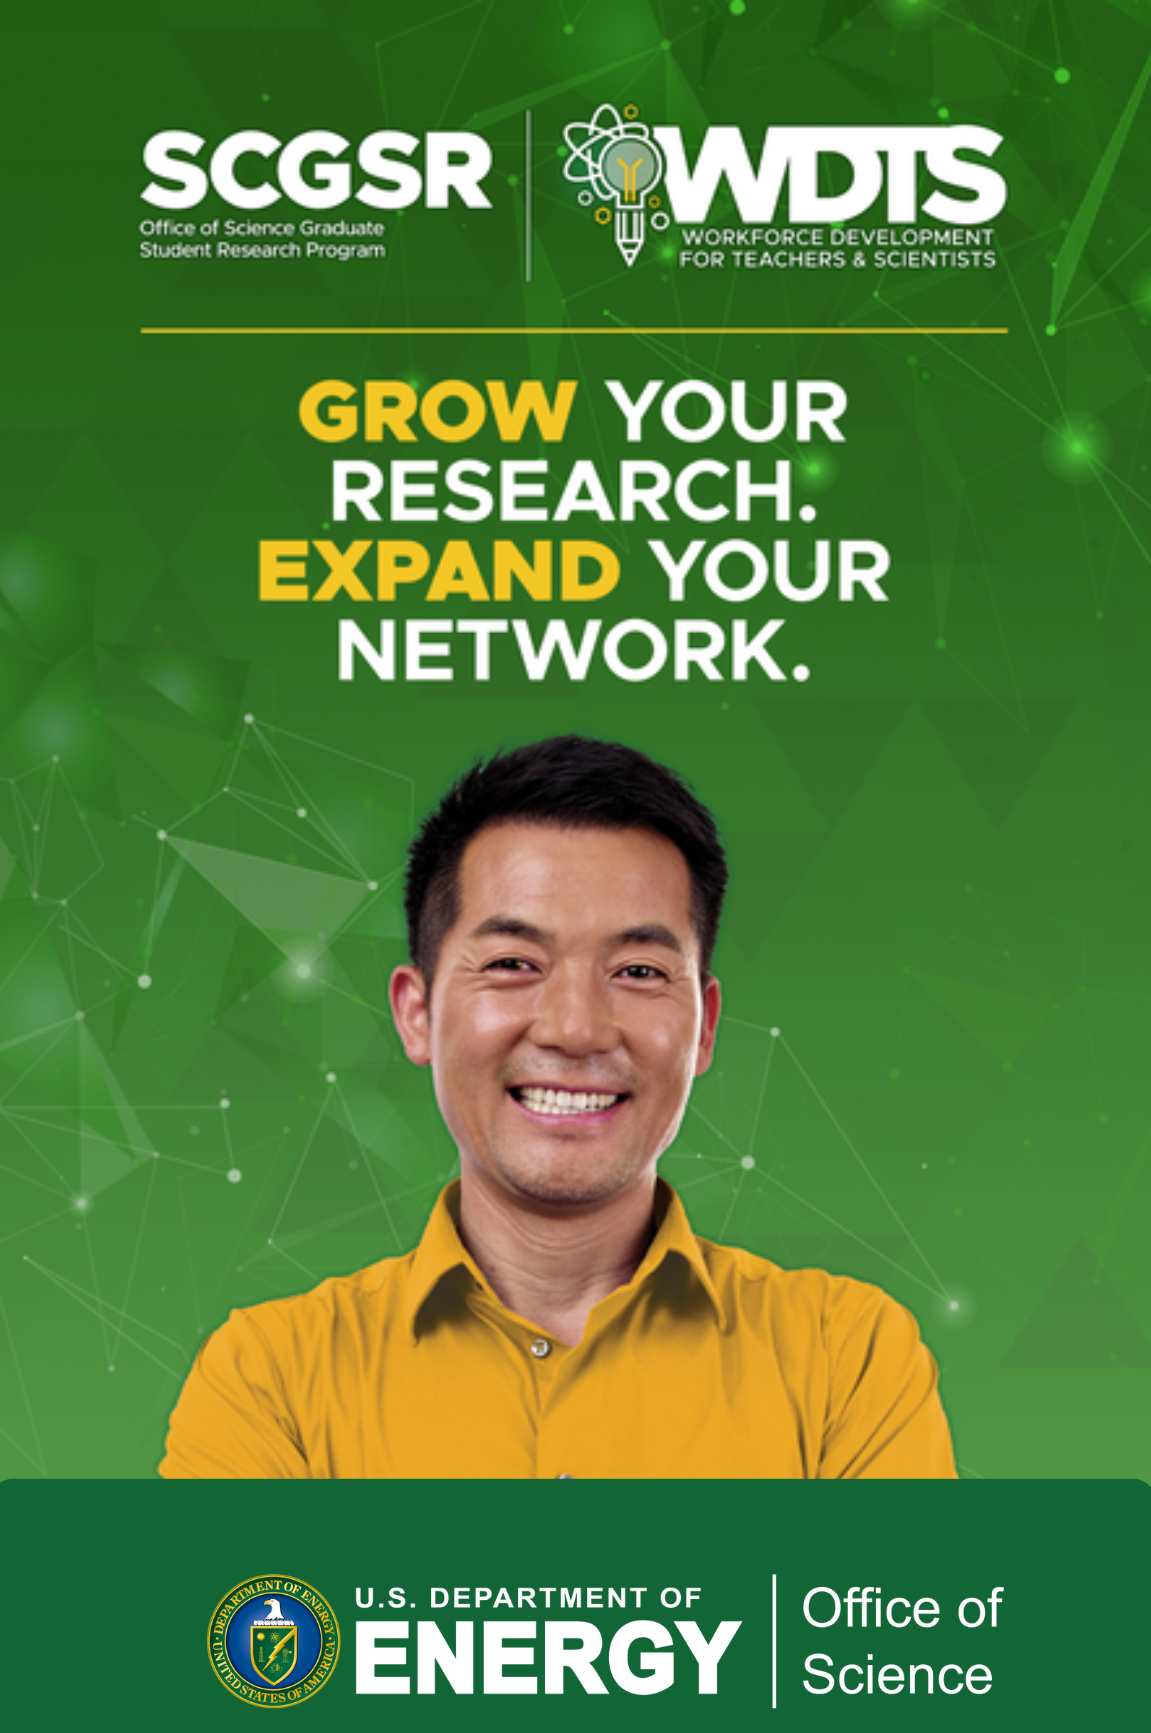 SCGSR "Grow your research. Expand your network."